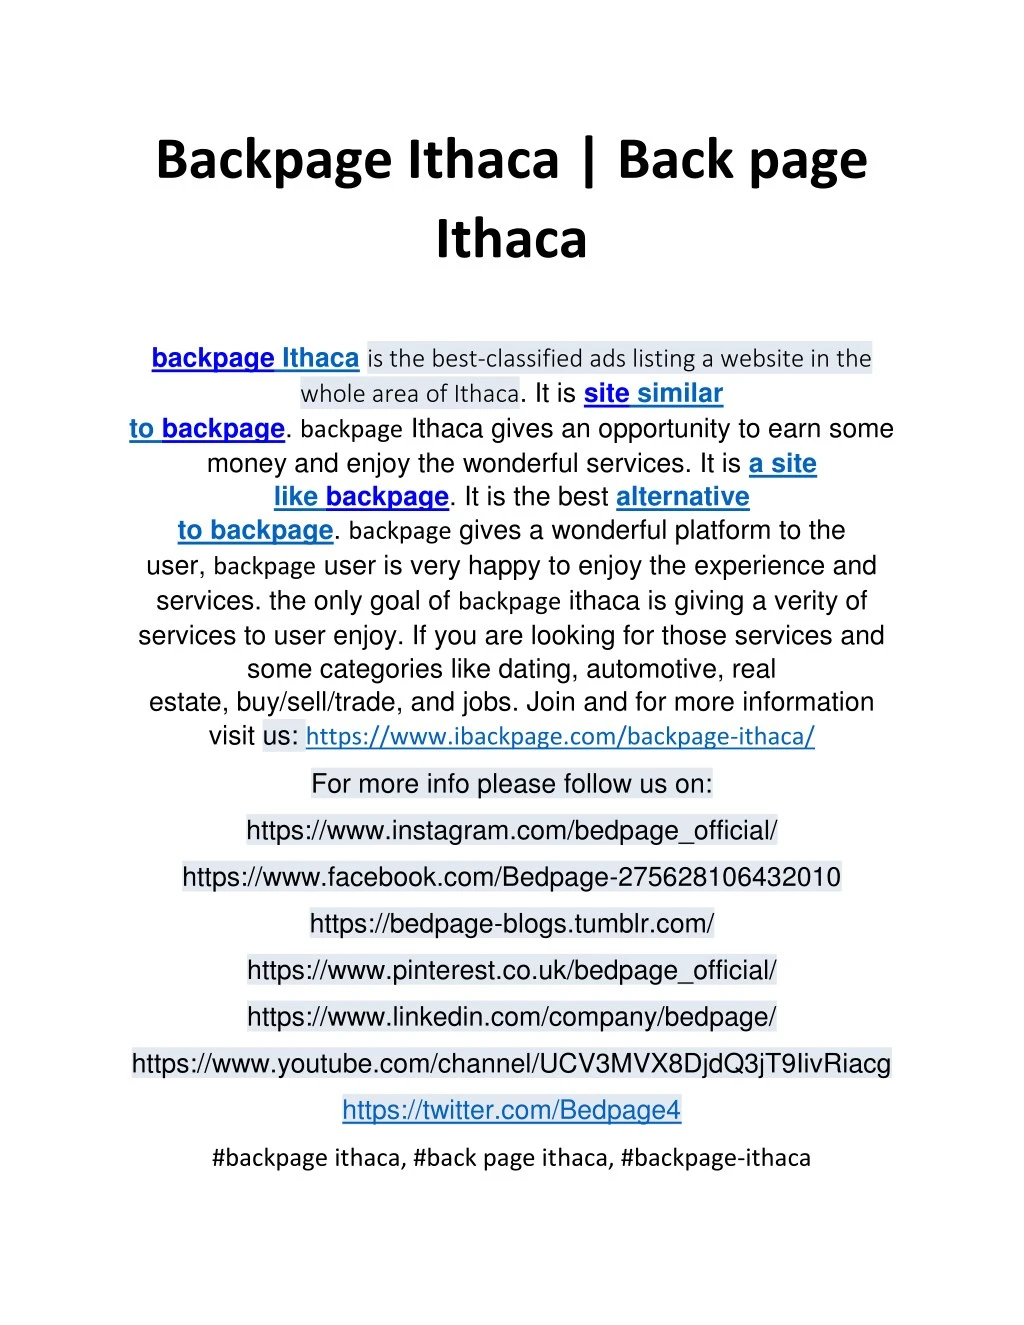 backpage ithaca back page ithaca